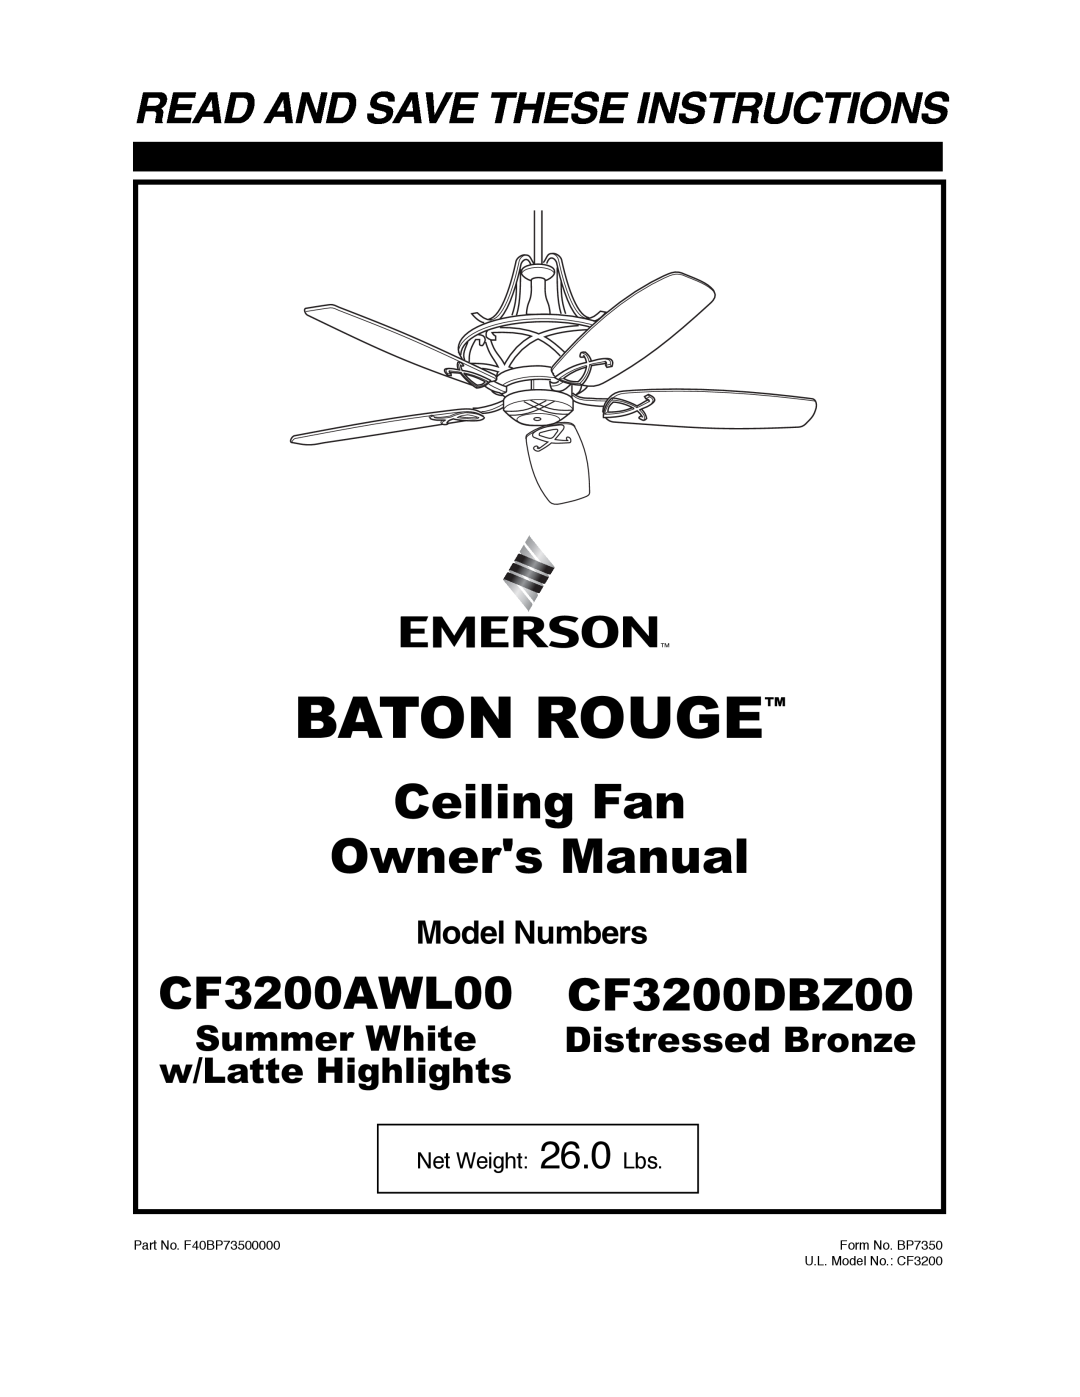 Emerson owner manual Baton Rouge, CF3200AWL00 CF3200DBZ00, Read And Save These Instructions, Model Numbers 